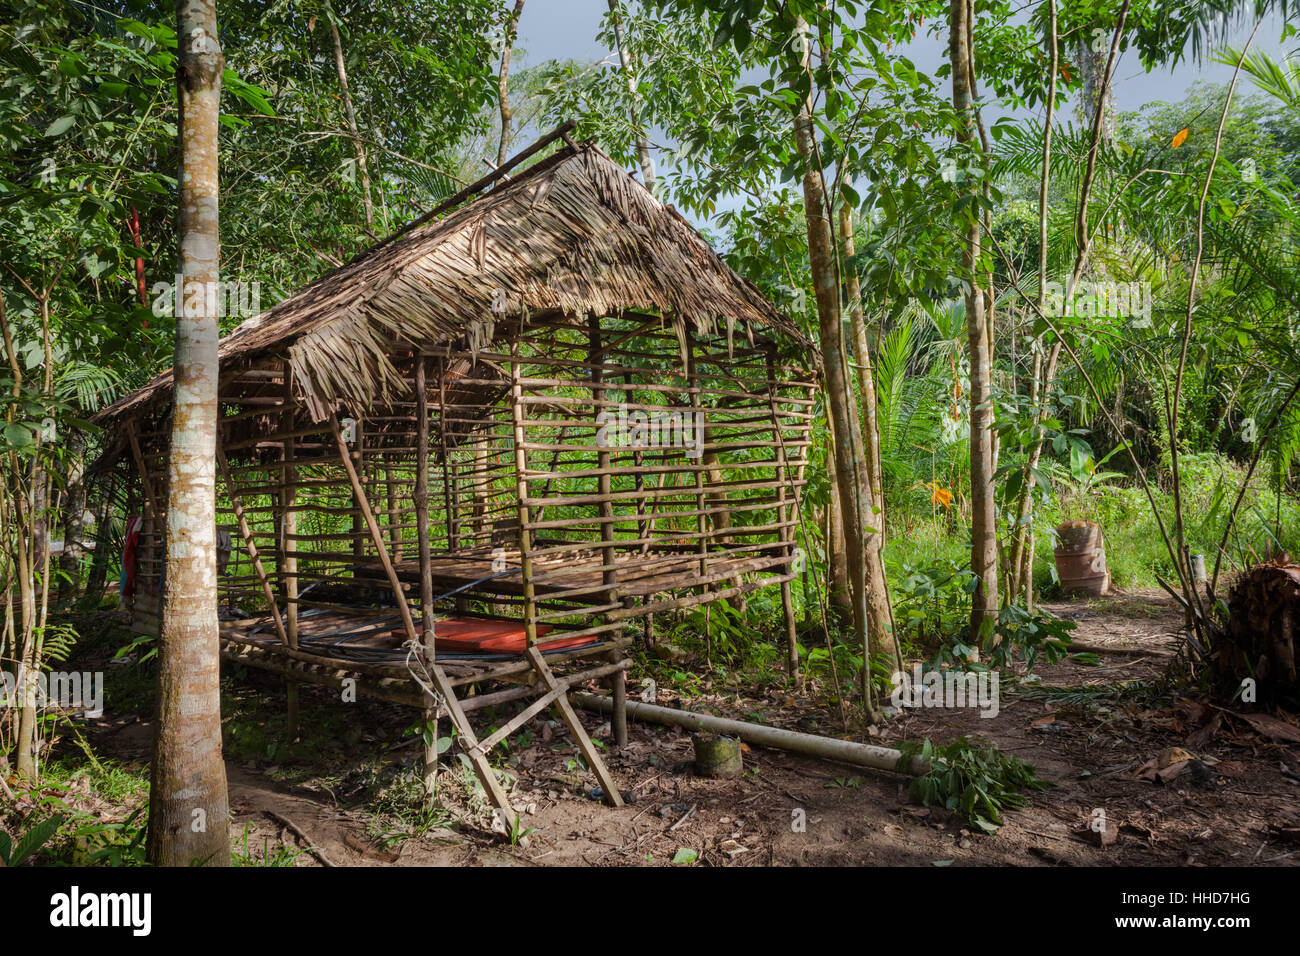 Timber and bamboo cage built to contain livestock (like goats}, remote village, Sabah, Malaysia Borneo Stock Photo